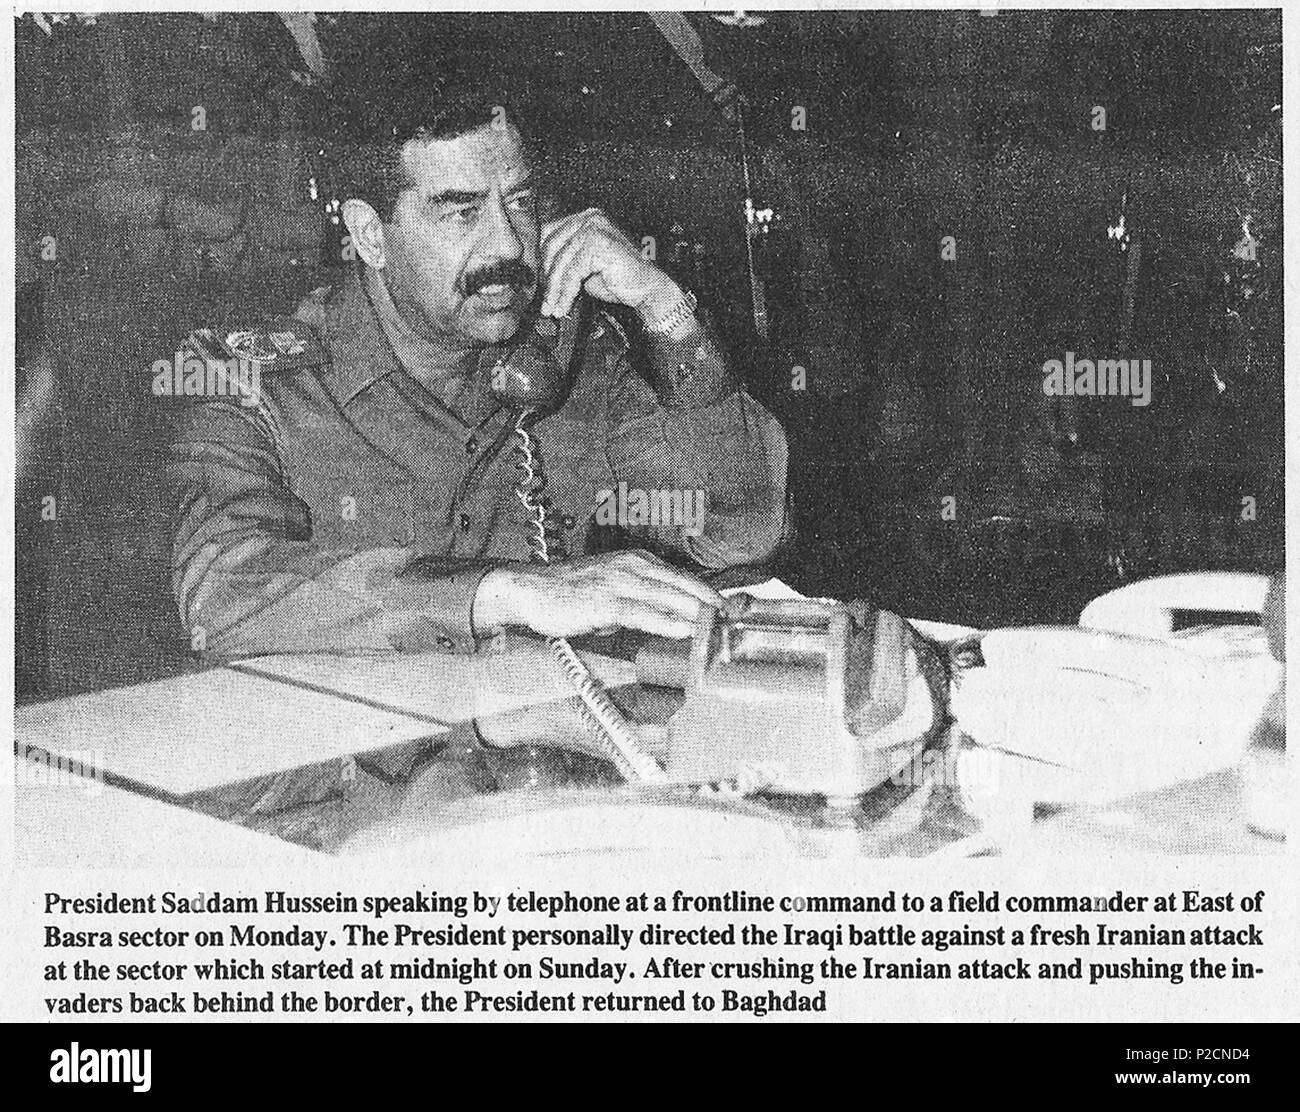 . English: Iraqi president and Field marshal Saddam Hussein speaking by telephone at a frontline command to a field commander at East of Basra sector on Monday, June 13th. The president personally directed the Iraqi battle against a fresh Iranian attack at the sector which started on Sunday, June 12th. 13 June 1988. Iraqi News Agency 50 Saddam Hussein on a telephone call, 1988 Stock Photo